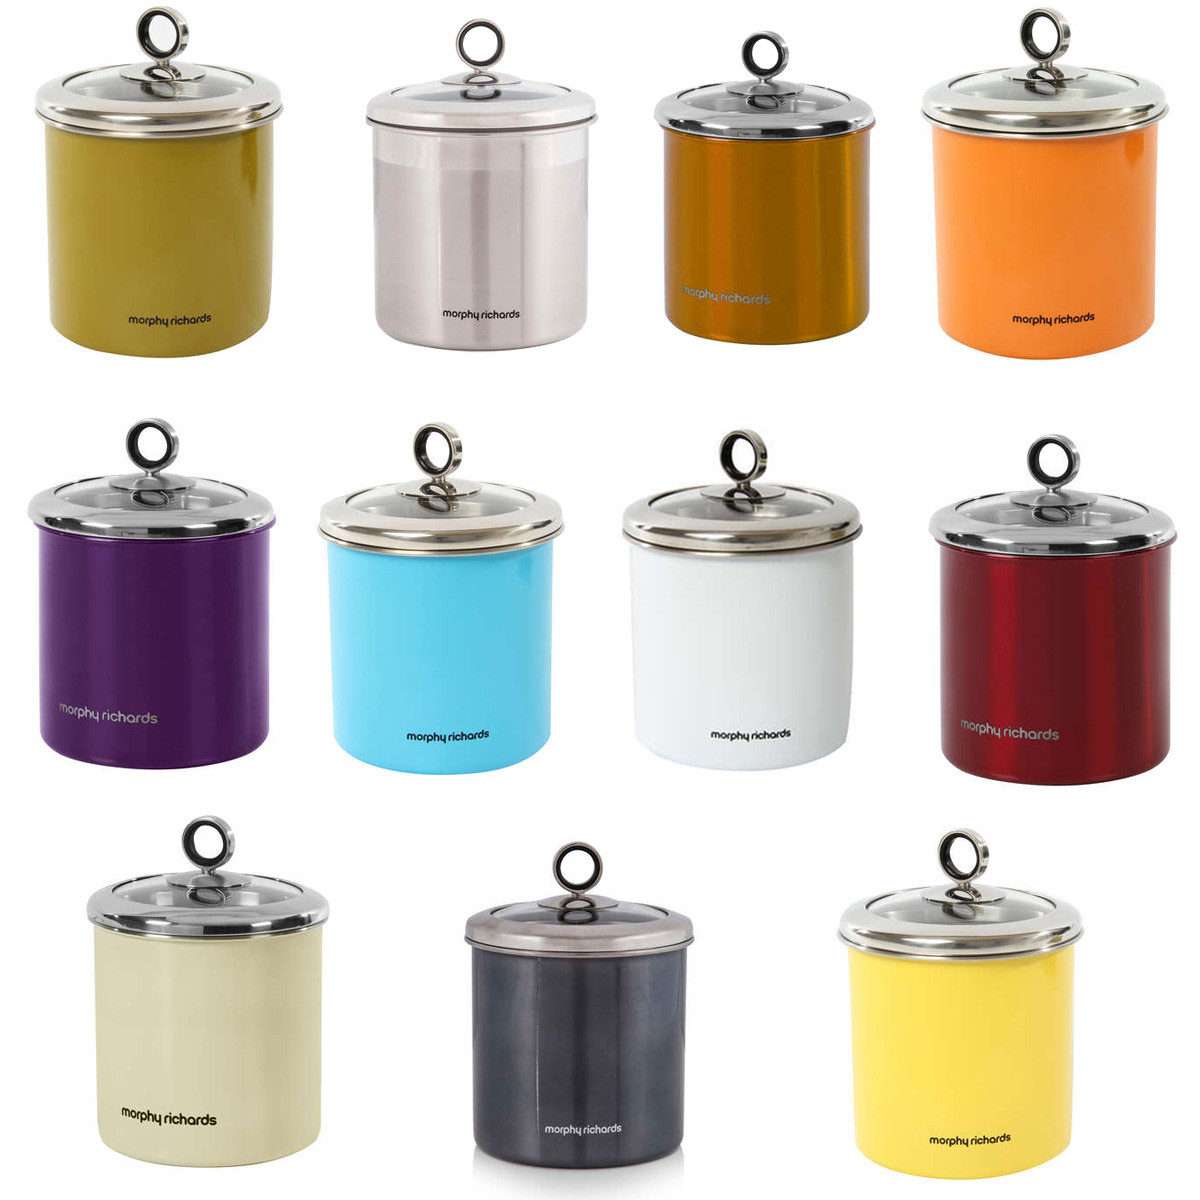 Kitchen Storage Canisters
 MORPHY RICHARDS 1 7 LITRE STAINLESS STEEL LARGE KITCHEN